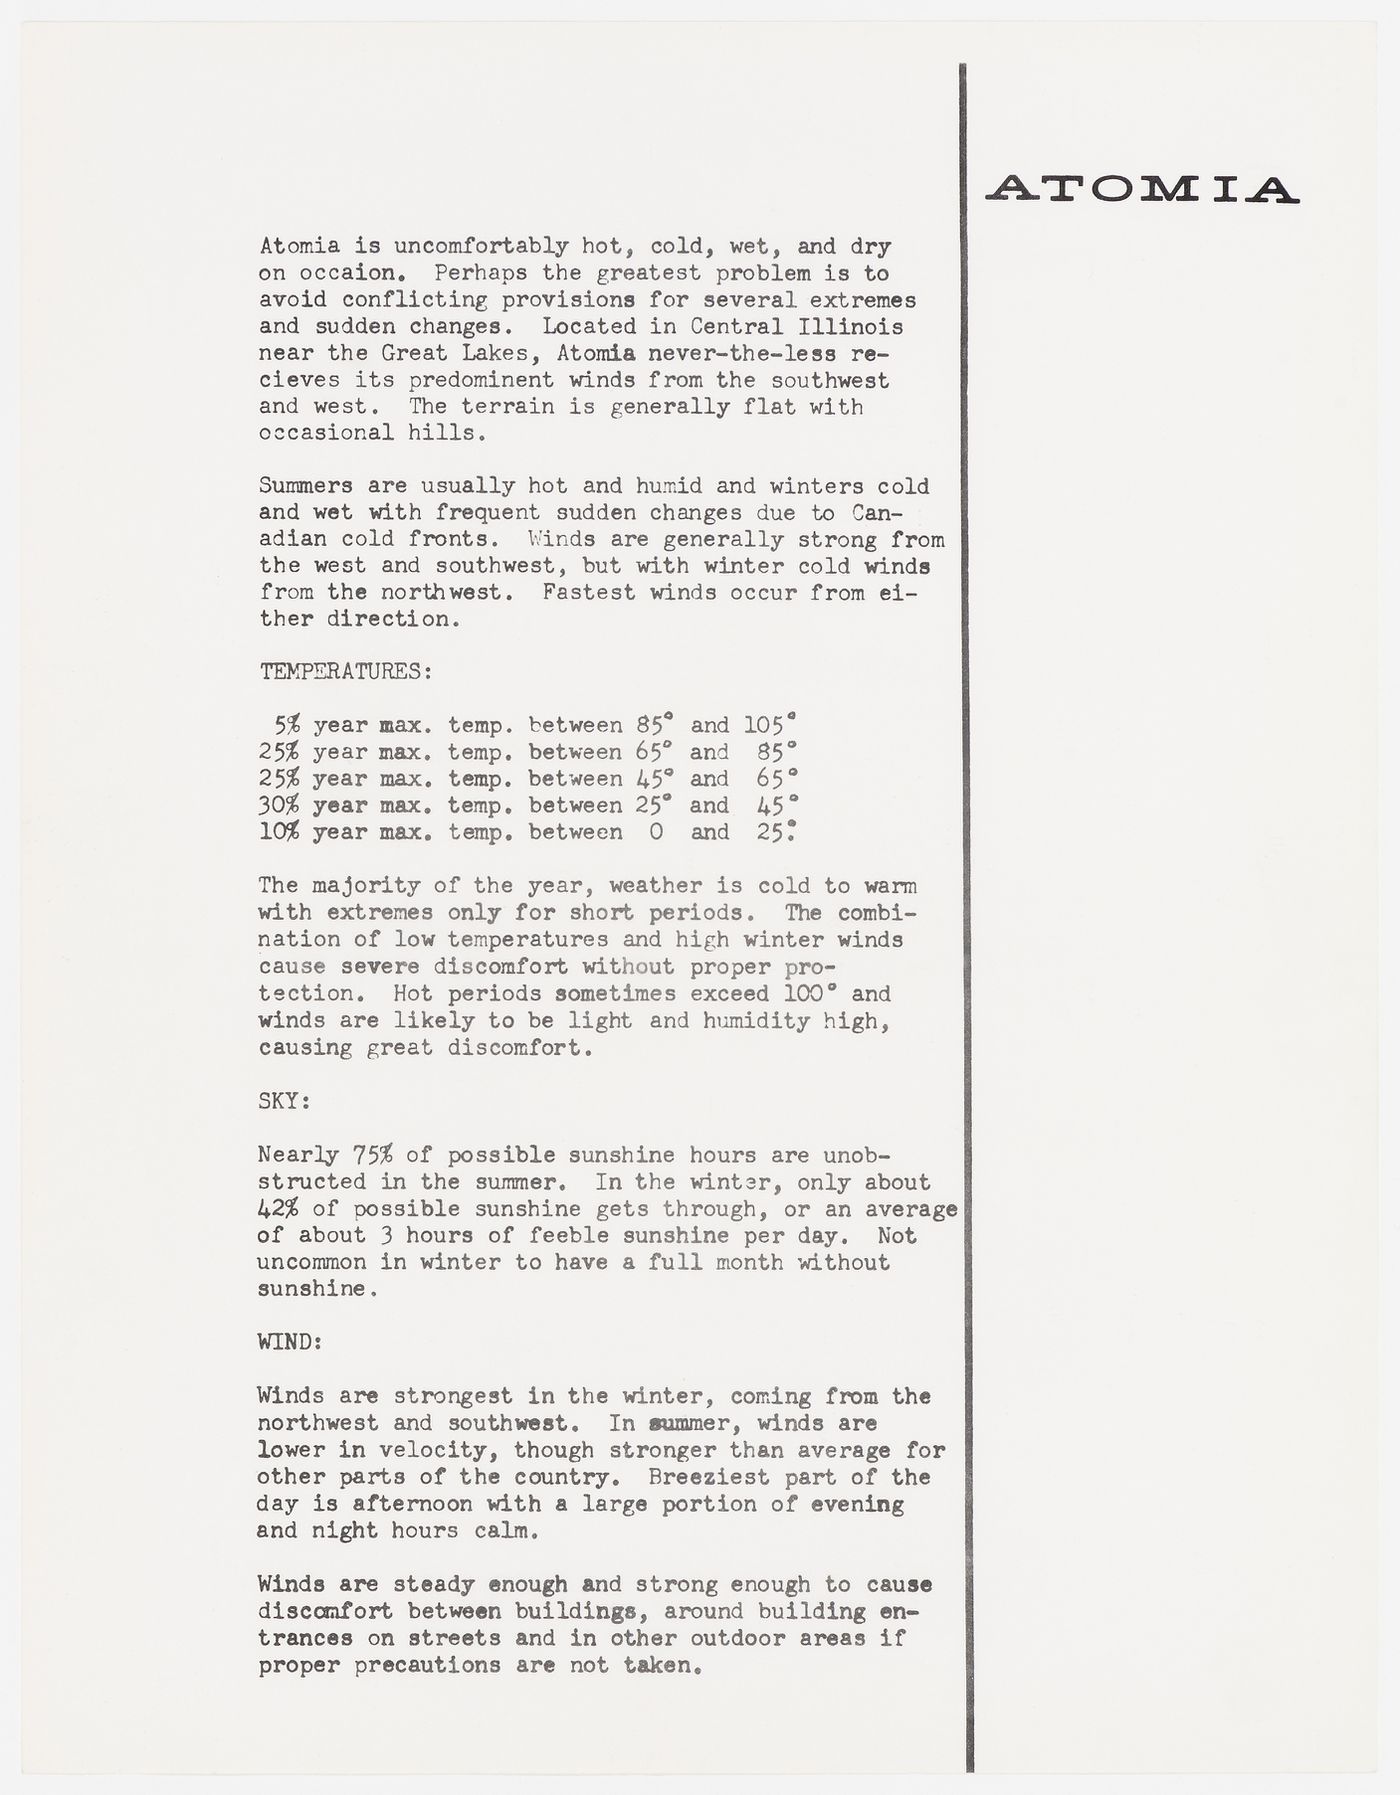 Atomia: information on climate (document from the Atom project records)